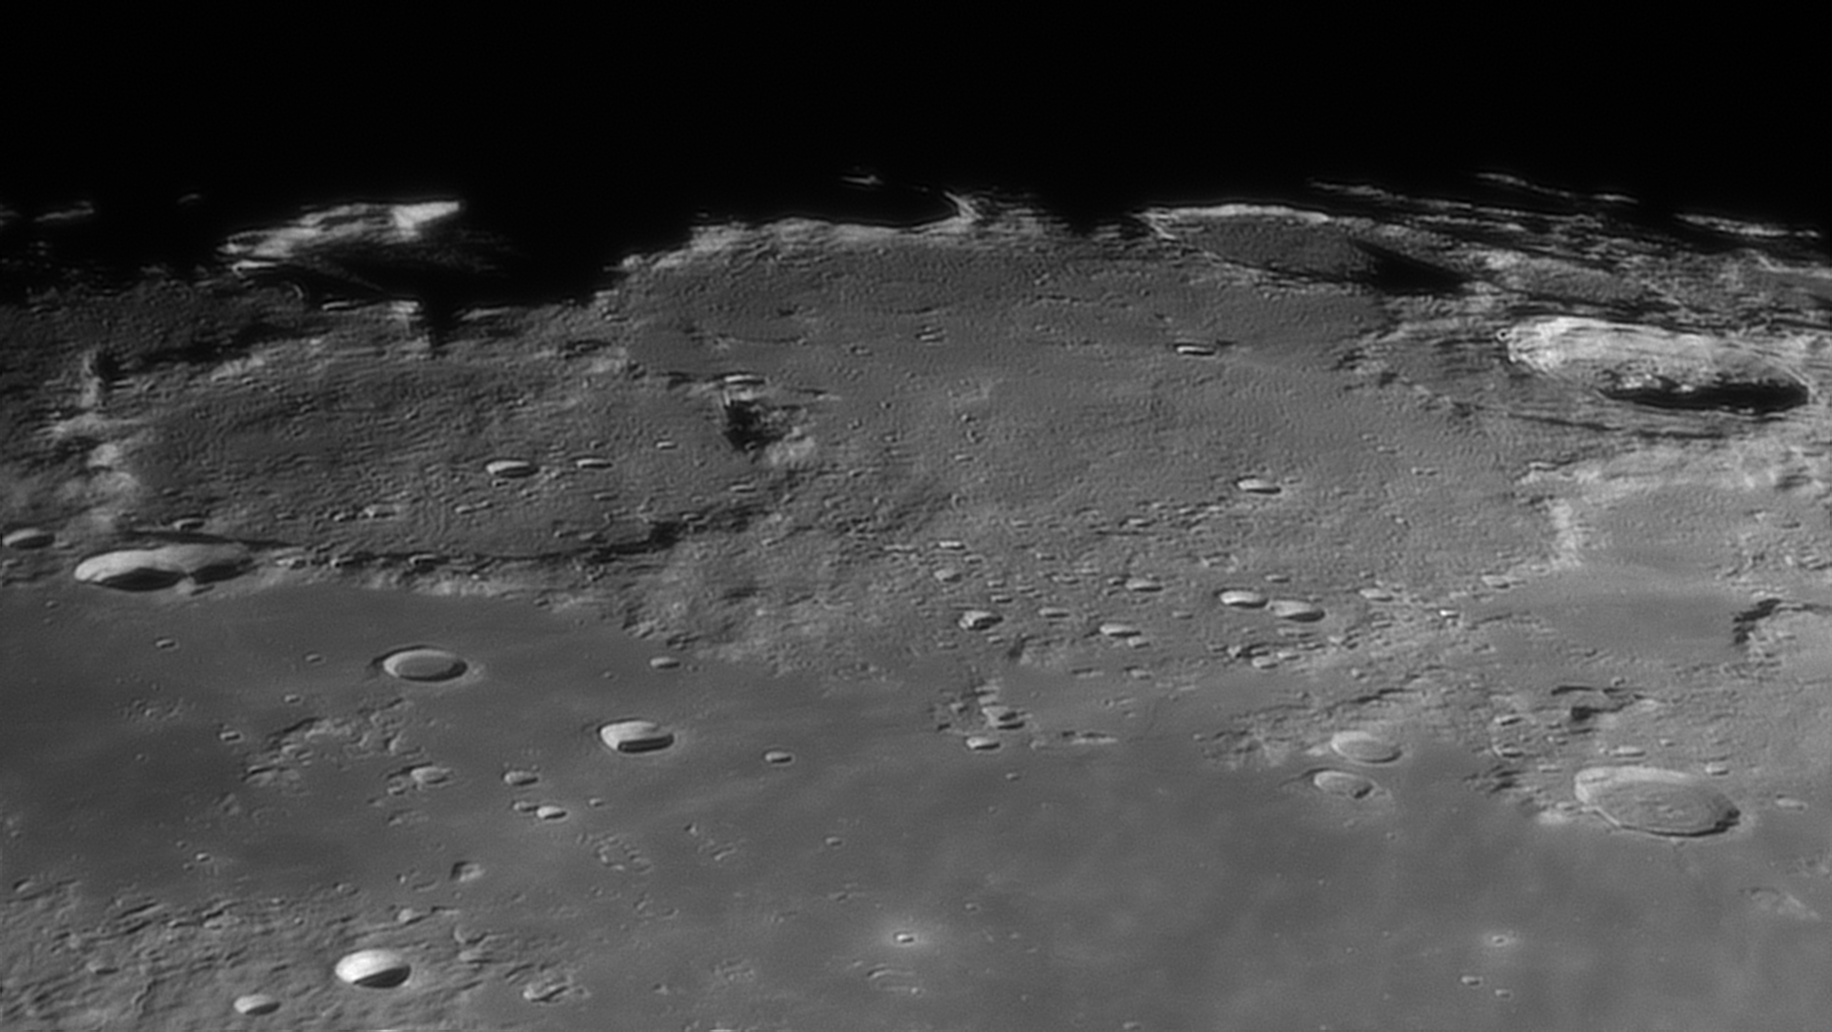 2022-01-14-2204_3-G-Moon_lapl4_ap252_Herschel.png.2ad6c423f9a7f804d61bc214eec04556.png